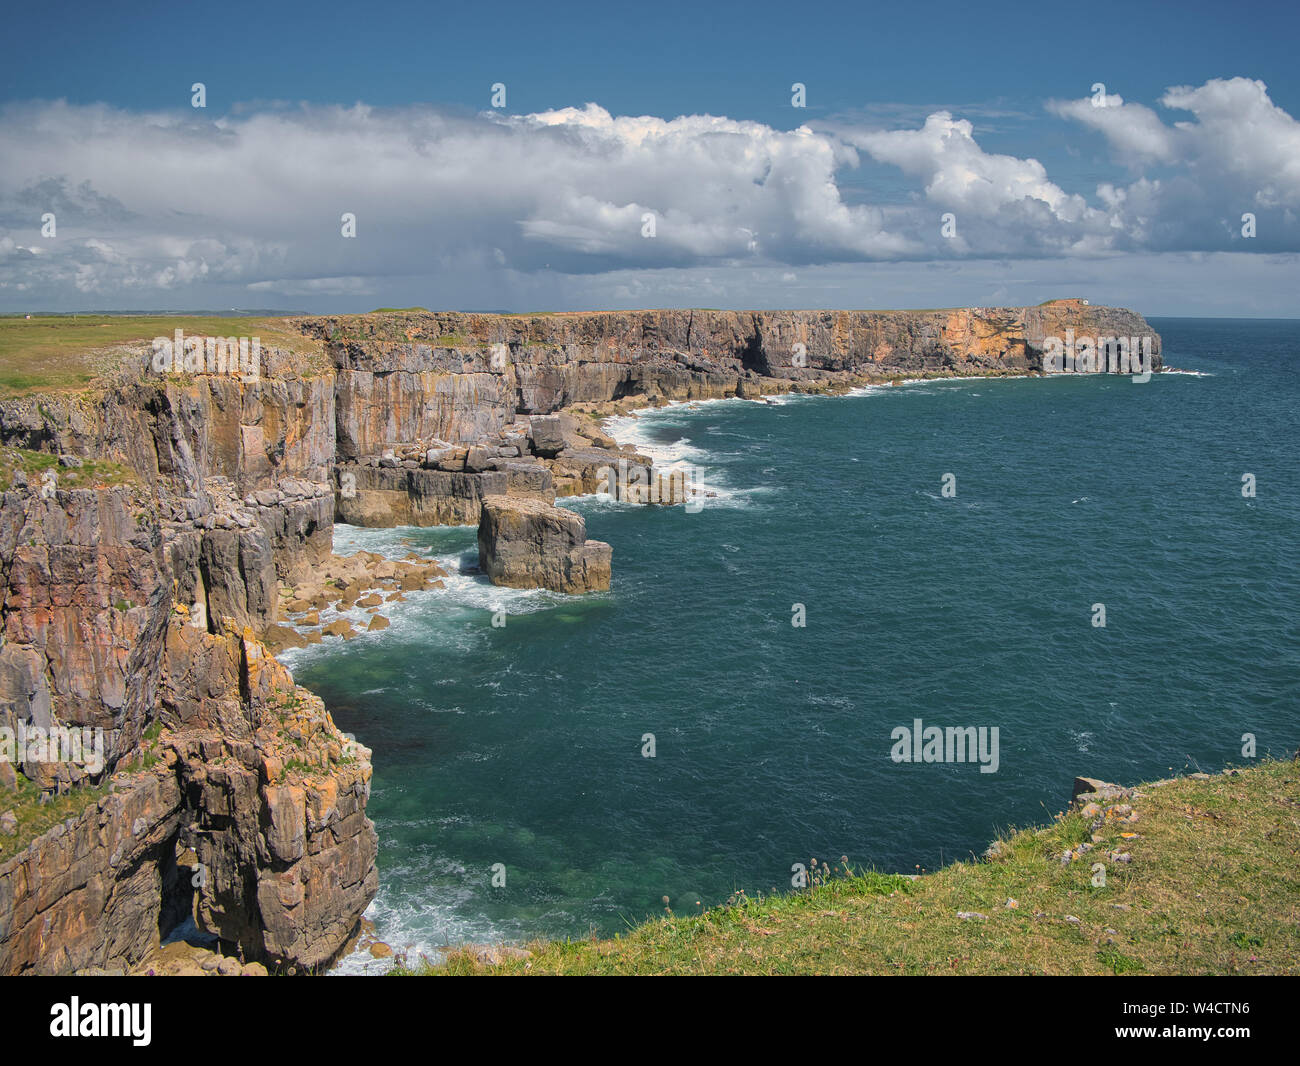 Coastal cliffs near Castlemartin in Pembrokeshire, South Wales, UK, as viewed from the Coast Path, showing strata in the sedimentary rock. Stock Photo